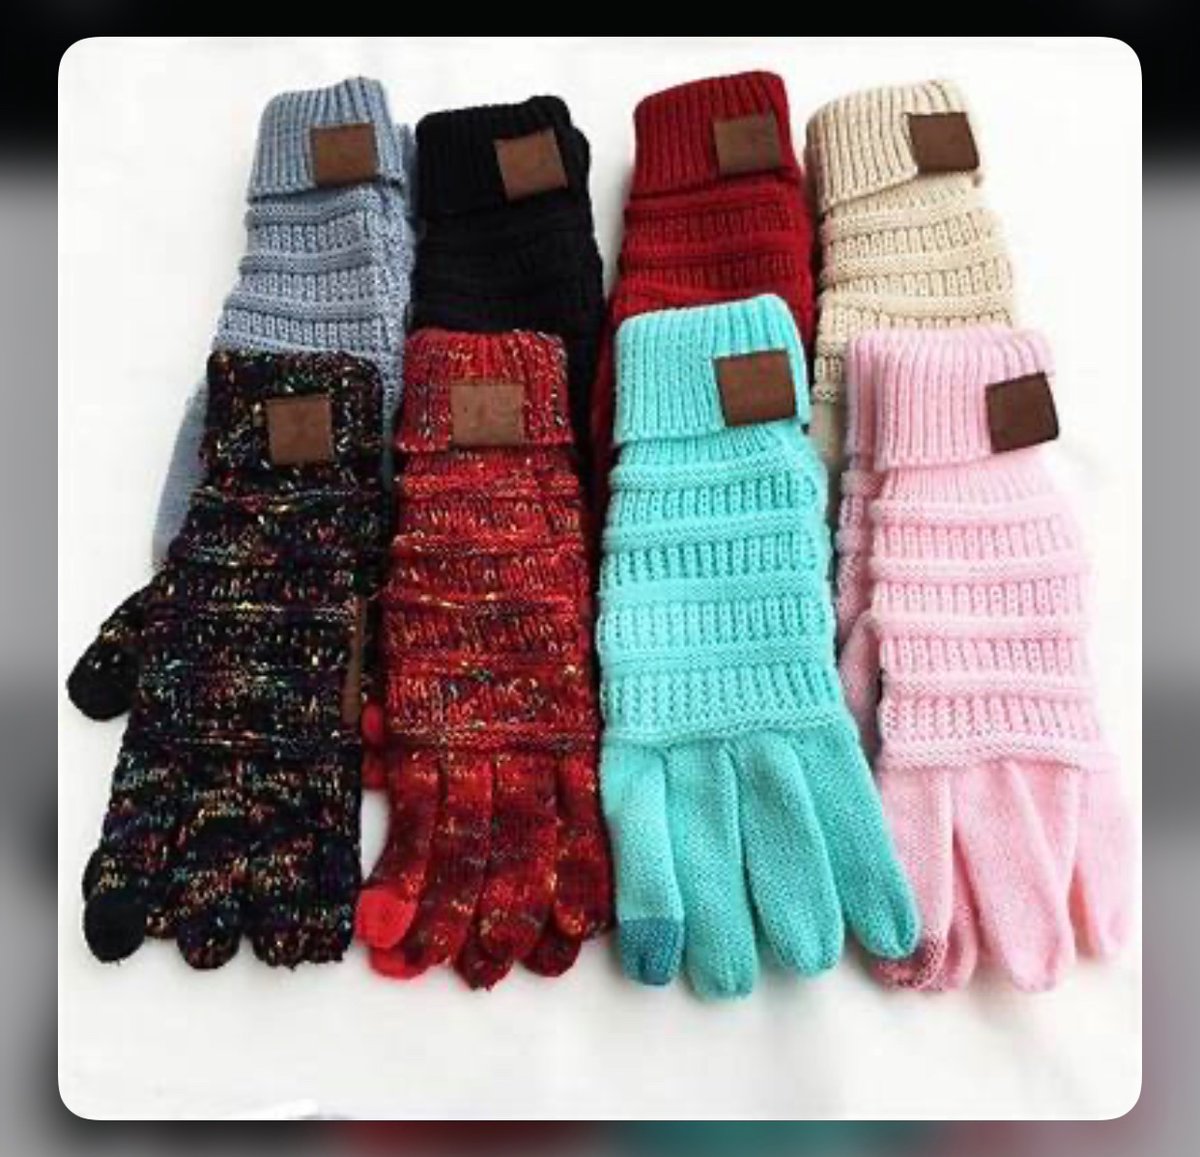 Part 6. ❄️❄️🥶😳Yes im carrying #knitgloves when i get ready you and me Y🔥eap! if you spend with someone no replys never marriage🔥#fireplaces #corduroyfashions #cinnamon #christmasinjuly ✨🎄🙋🏽‍♀️🧏🏼‍♀️🤦🏻‍♂️🤷🏻ftw! im on board ya all🌟never depressions #foggyghost 🌫😆